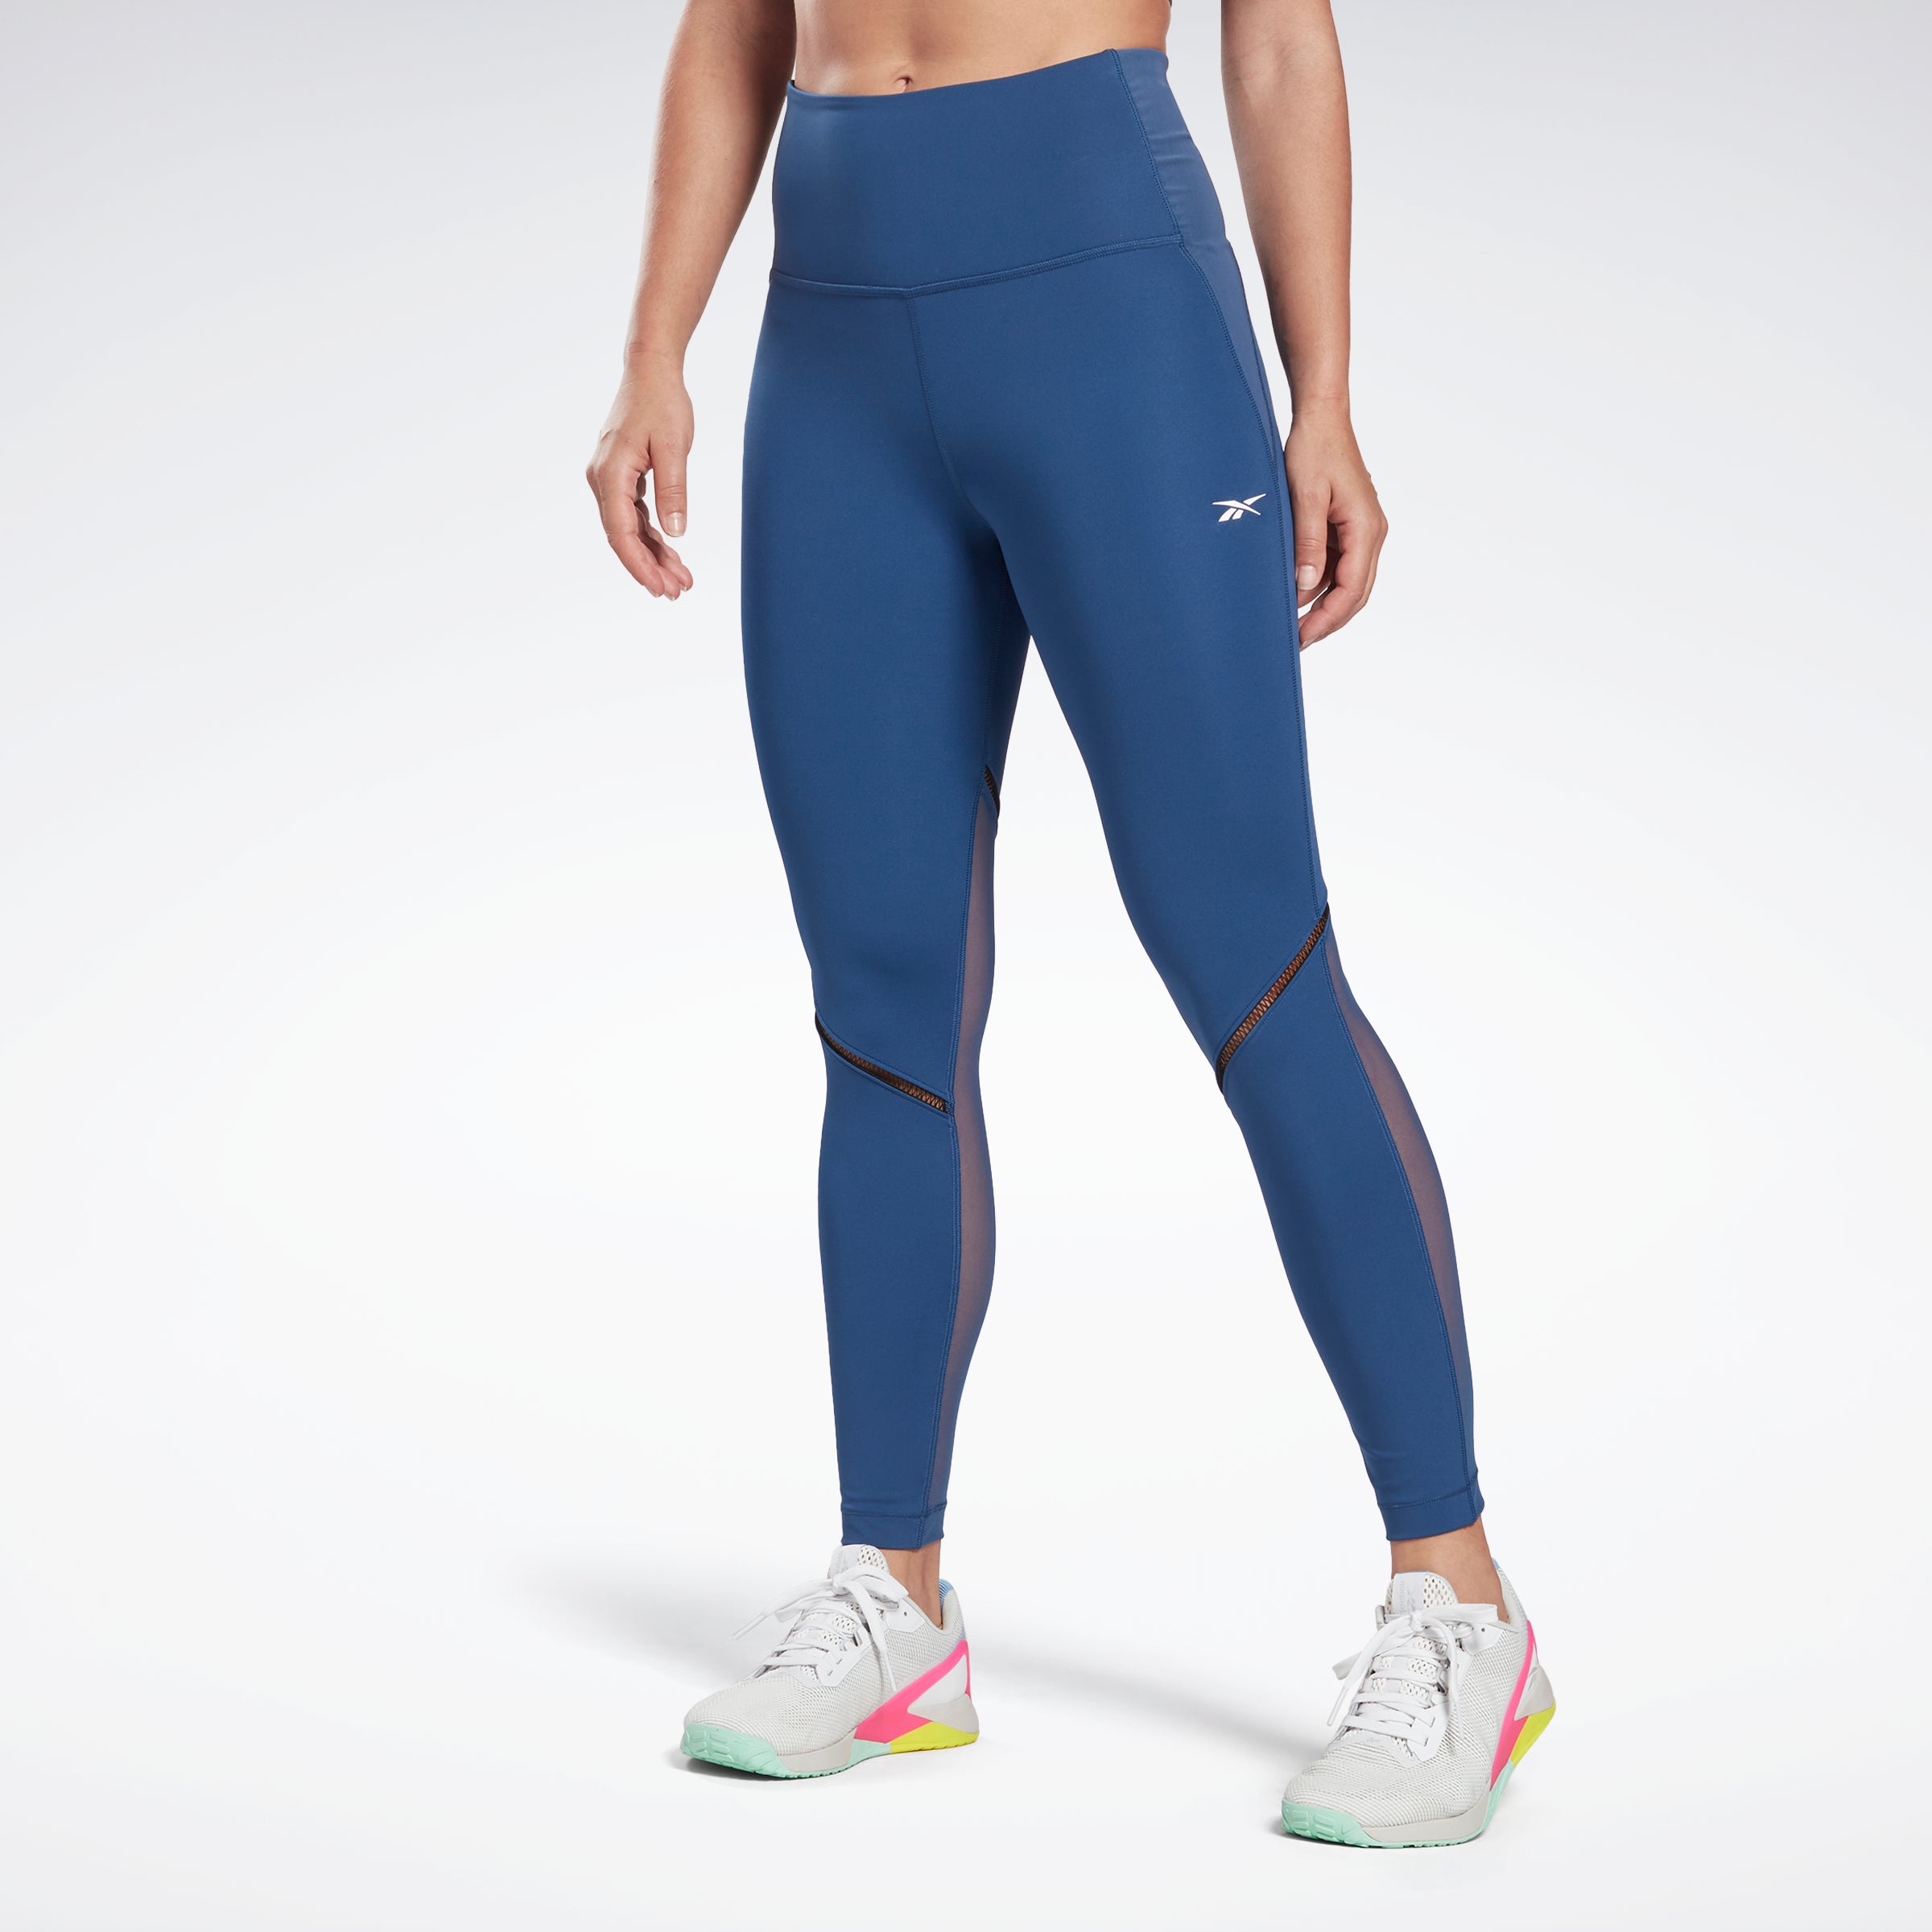 Reebok Womens Lux bold tights Compression Athletic Pants, Blue